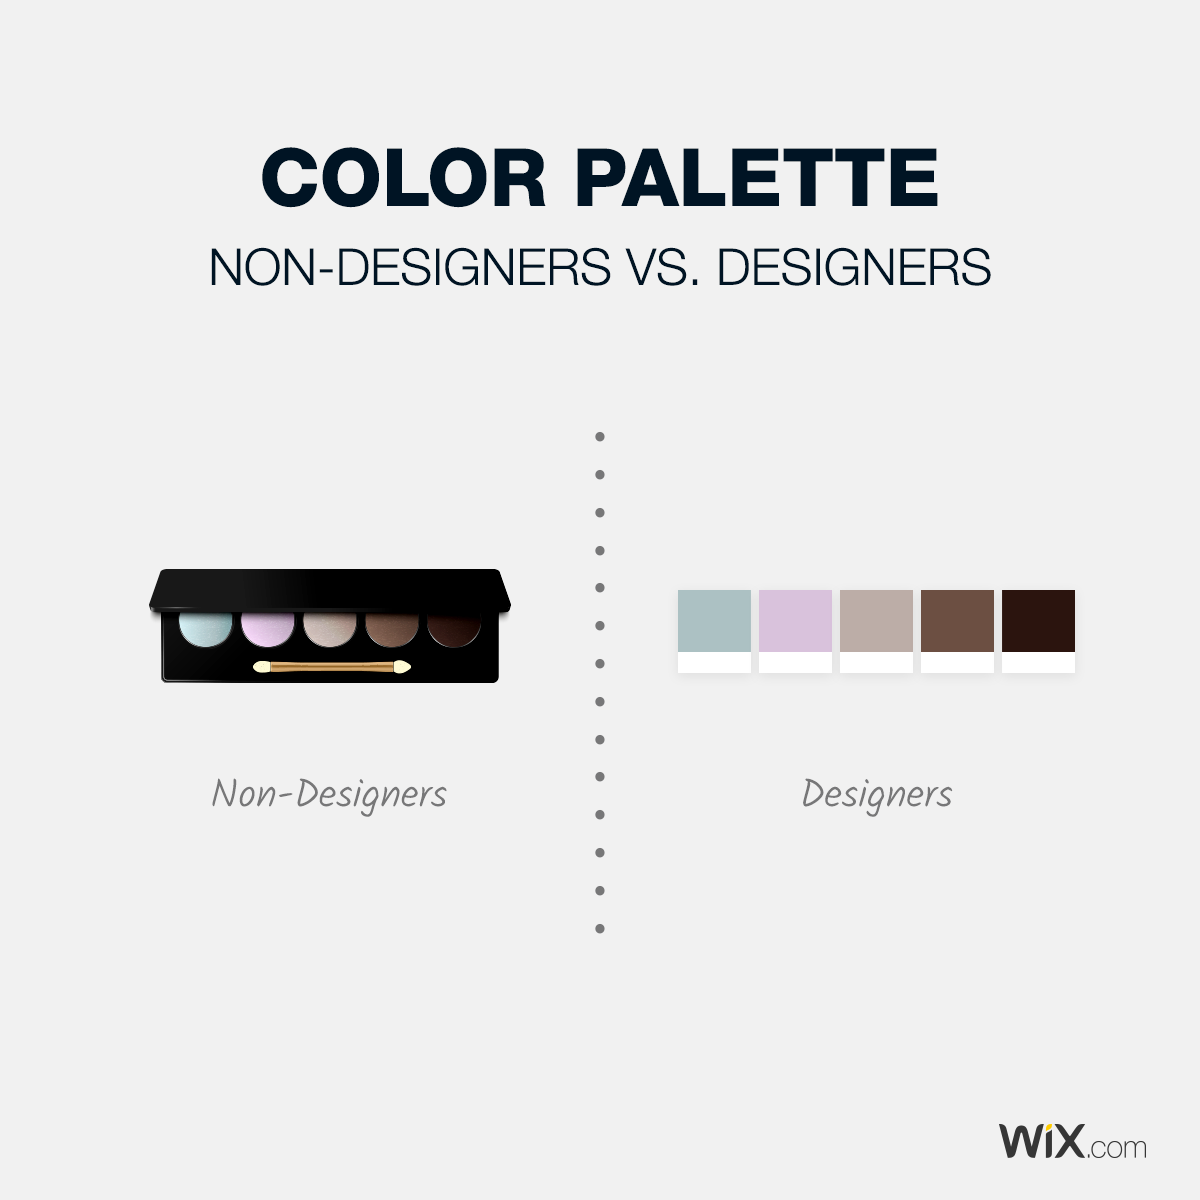 Differences Between Designers and Non-Designers - Color Palette